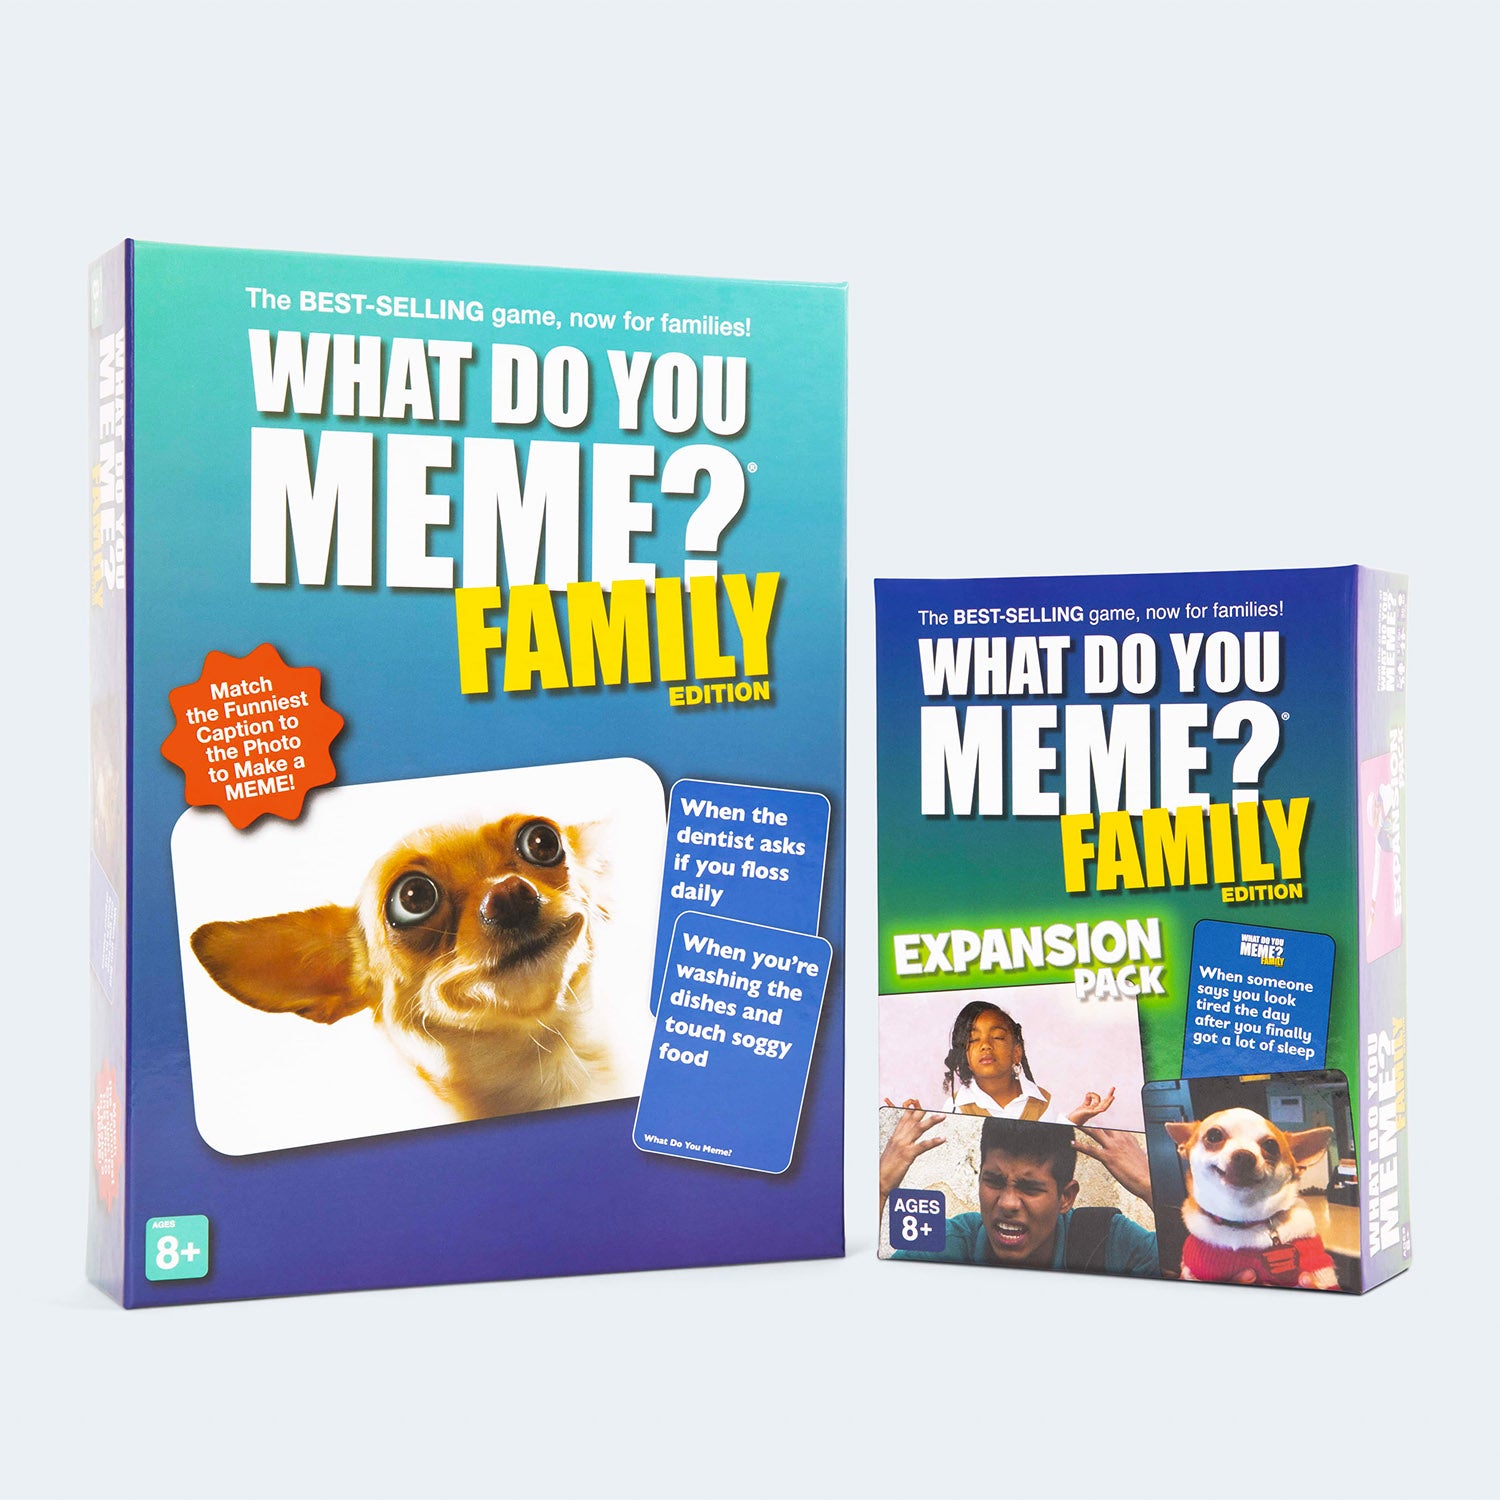 what-do-you-meme-family-edition-expansion-pack-game-box-and-game-play-05-what-do-you-meme-by-relatable